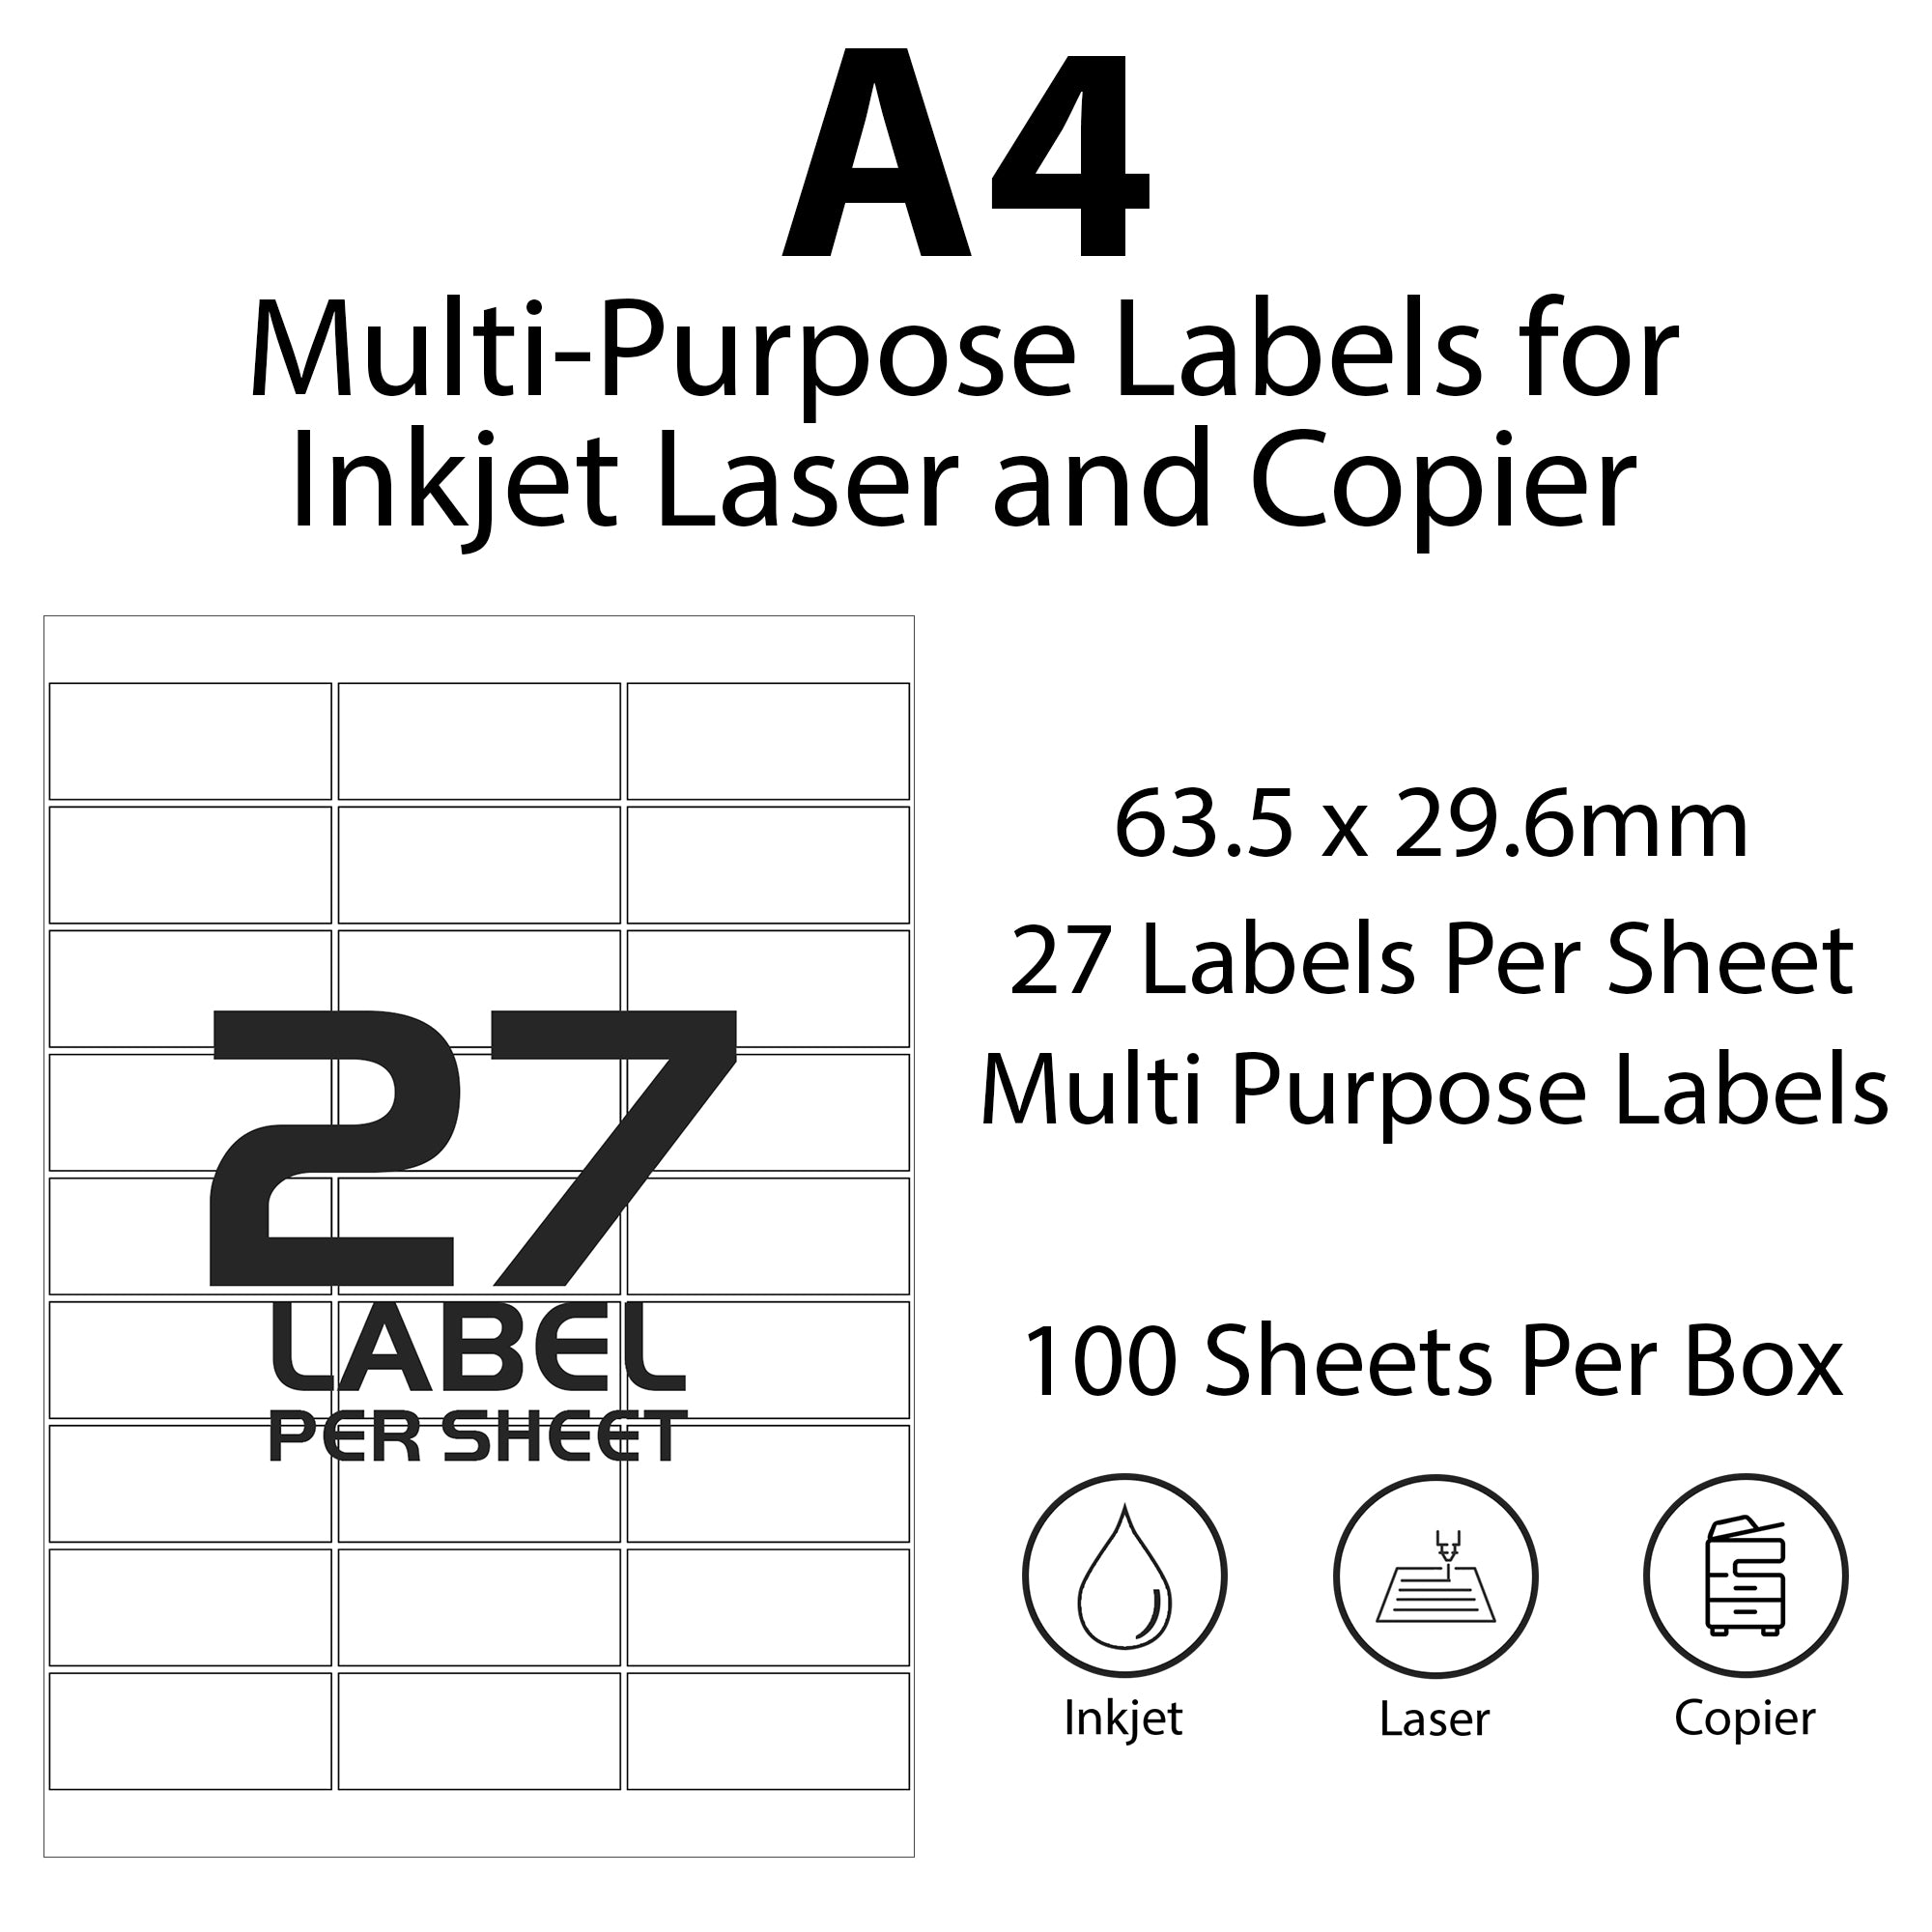 Address Labels Stickers White A4 Sheets Self Adhesive Inkjet Paper Laser Printer Label